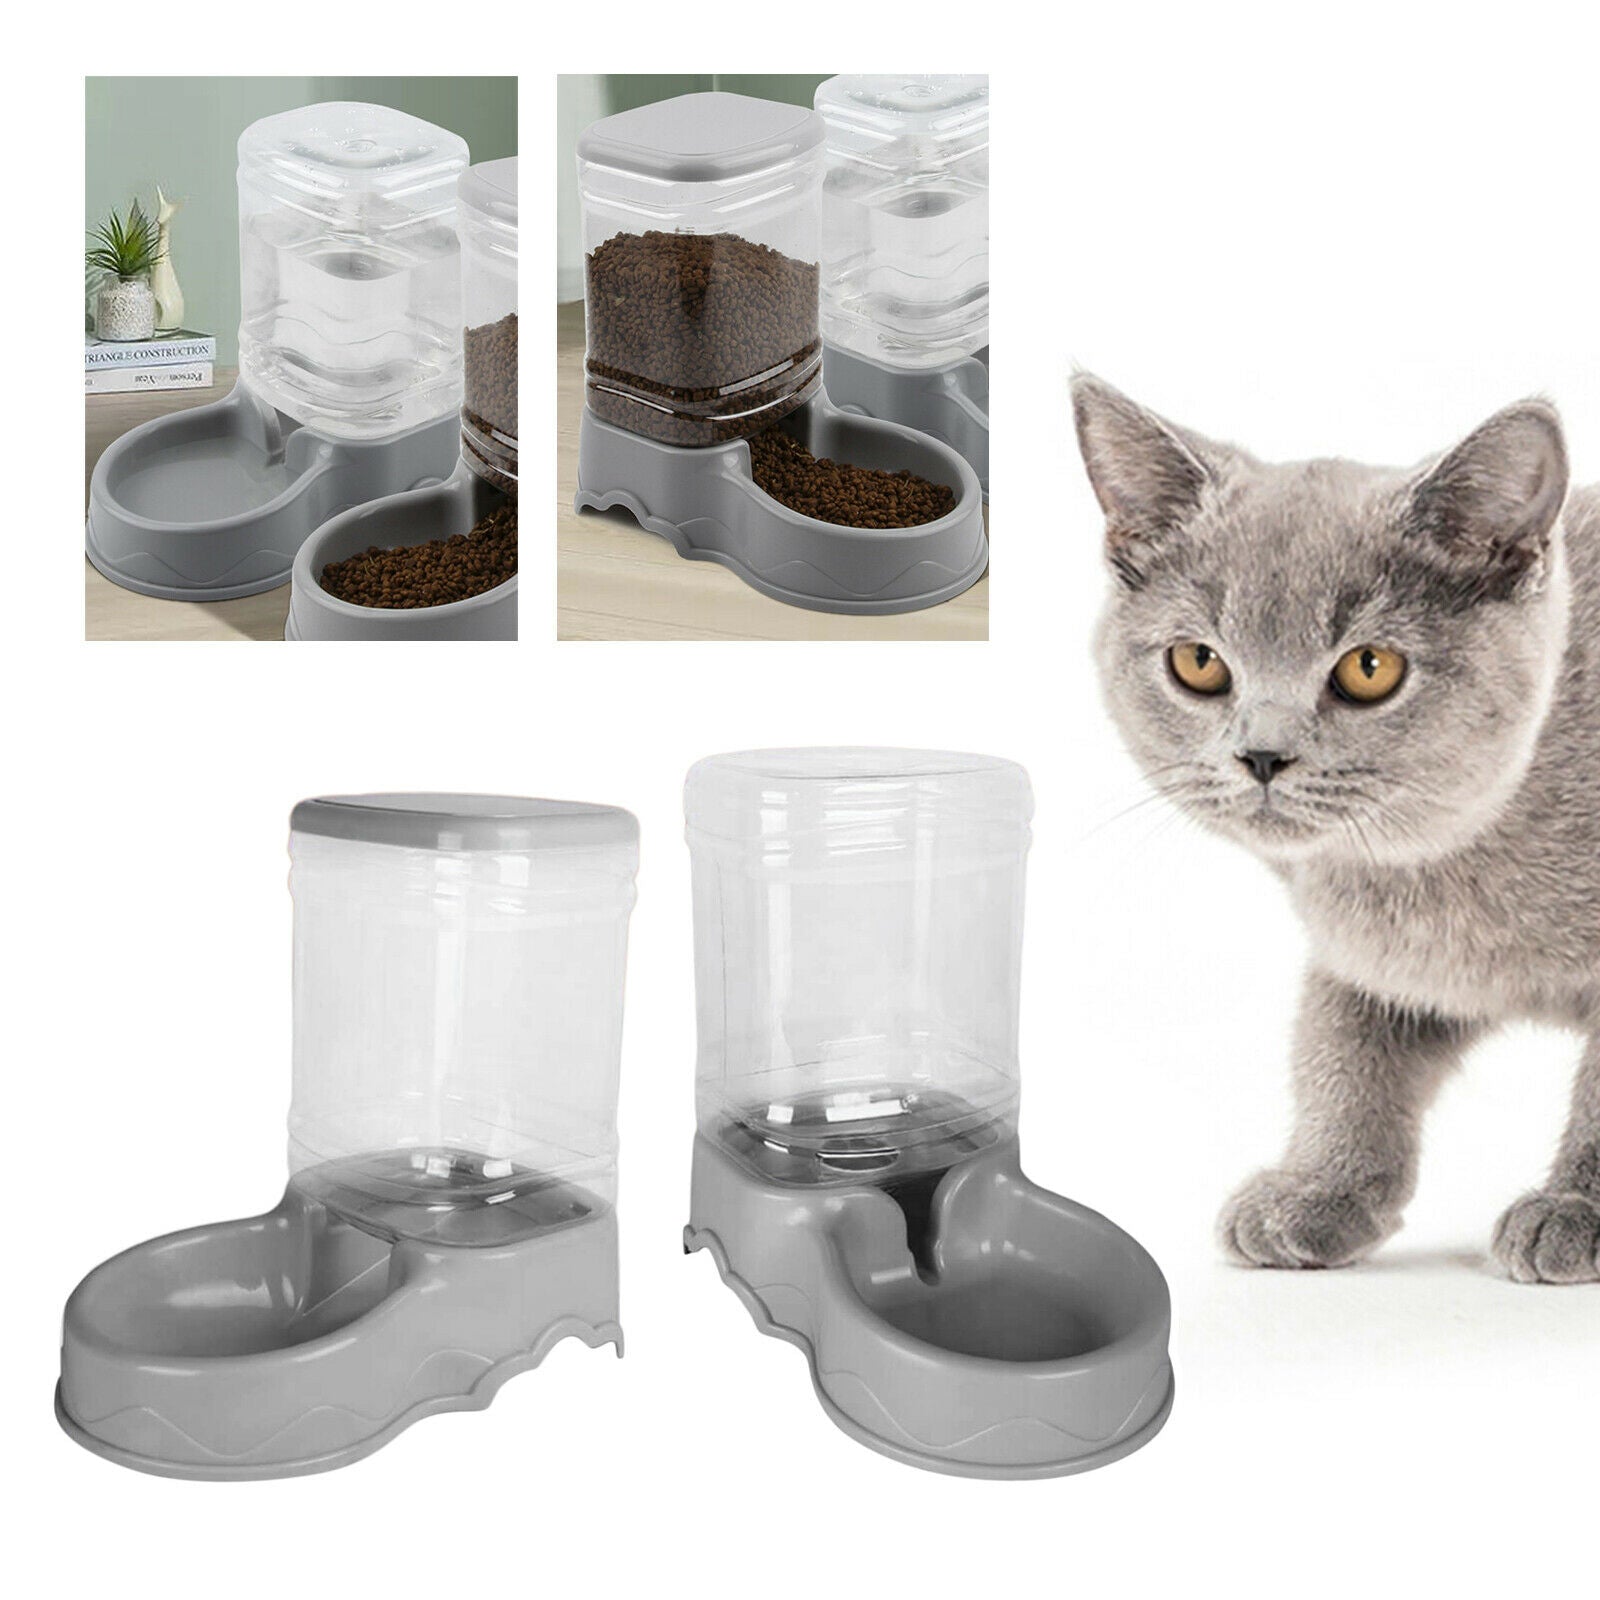 2x Automatic Feeder Small Medium Large Pets Food Feeder 3.5L Travel Supply Water